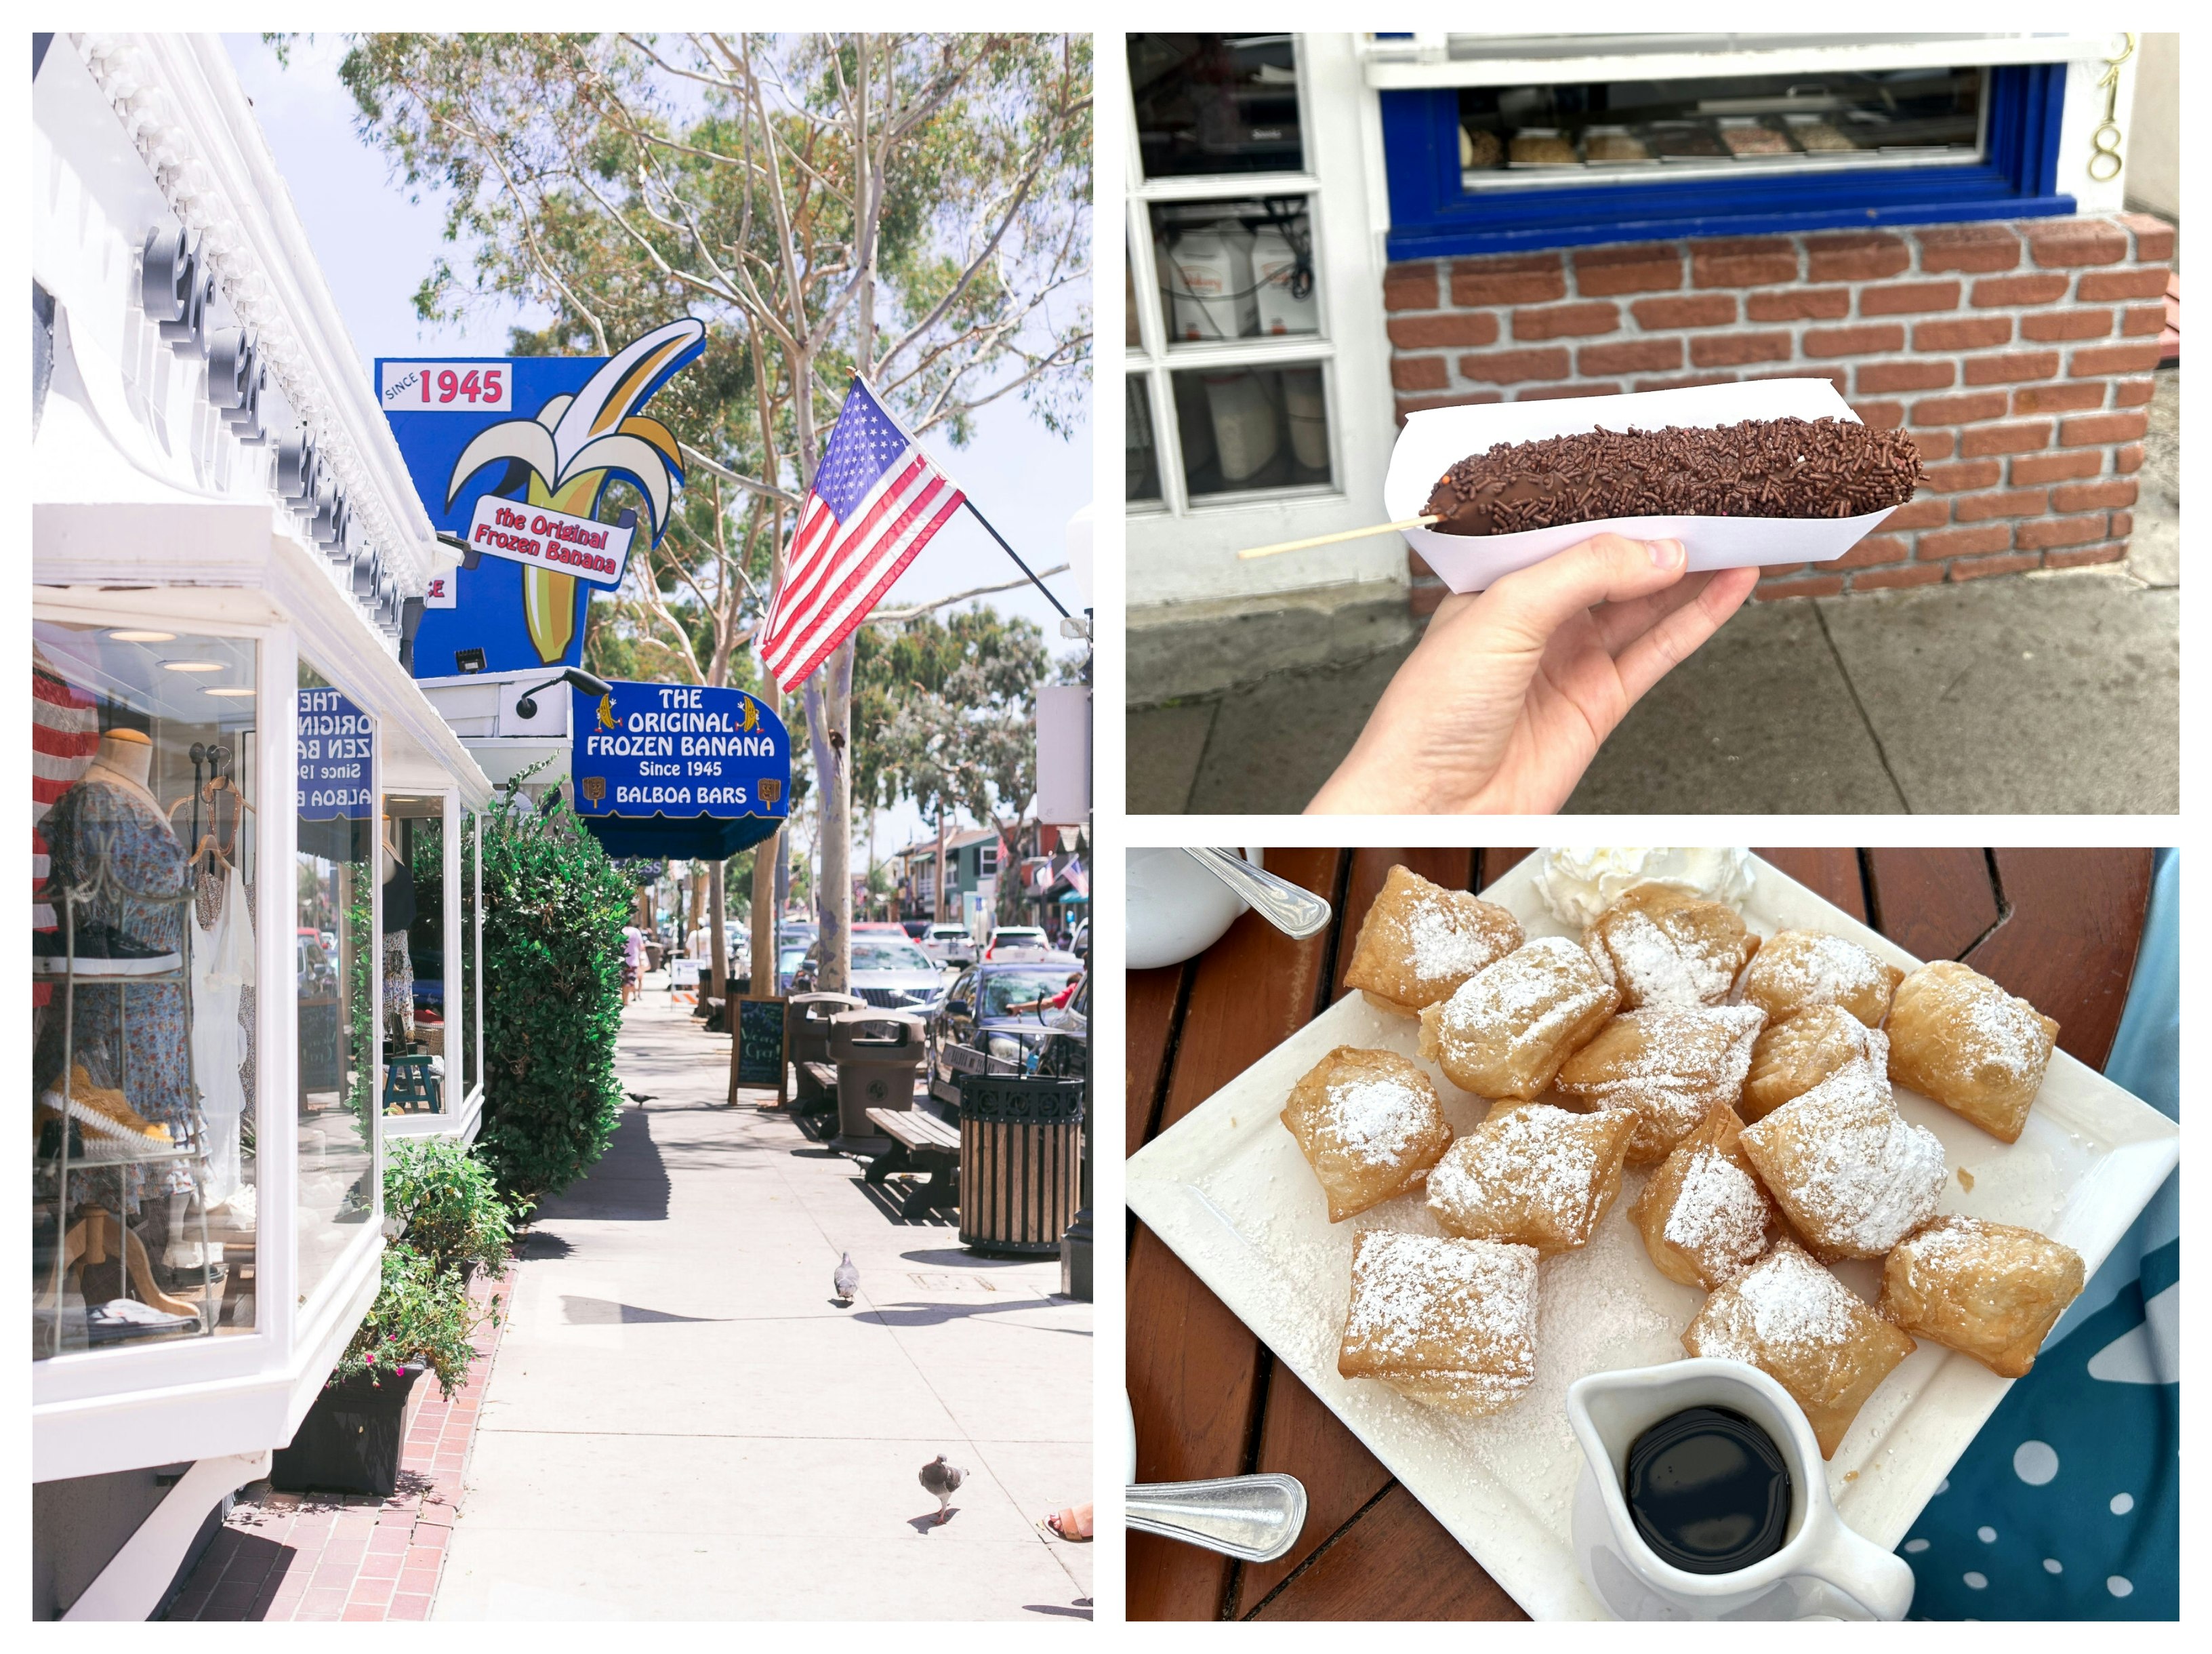 Collage Left: Exterior of a frozen banana shop with an American flag flying over it; Top right: A frozen banana; Bottom right: small sugar-covered treats with a small jug of syrup